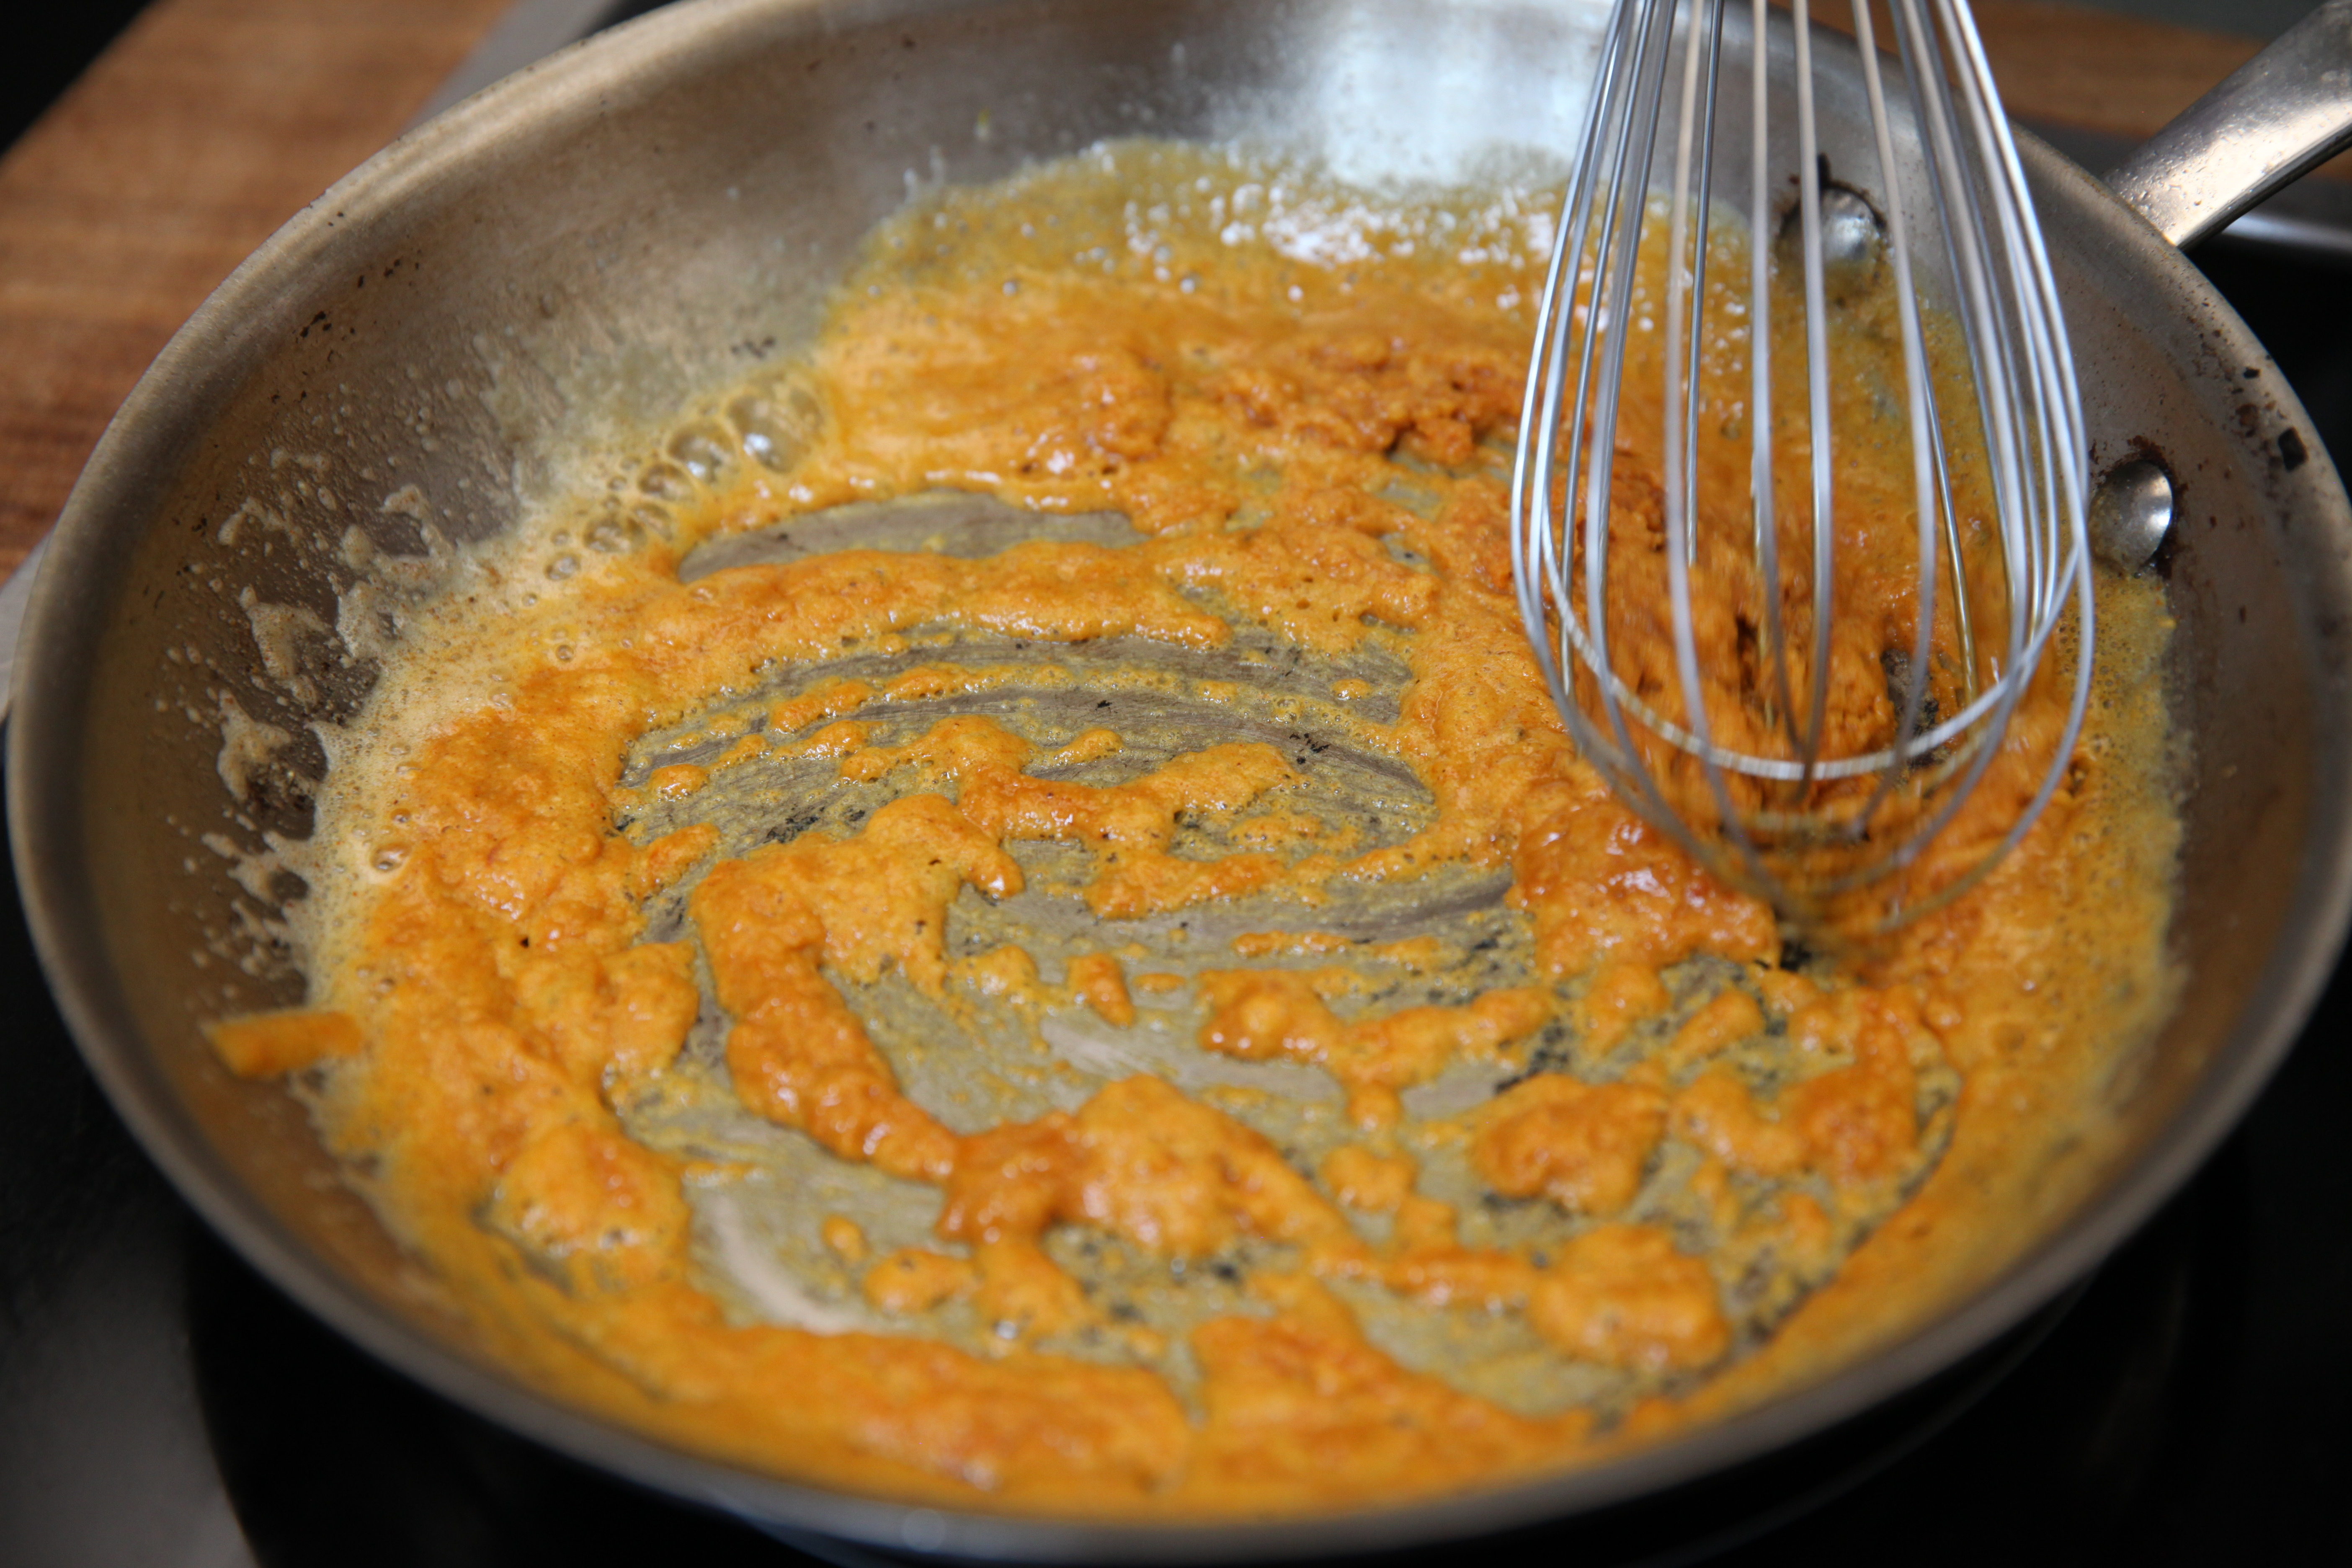 a golden brown roux used for kia damon's smothered chicken recipe